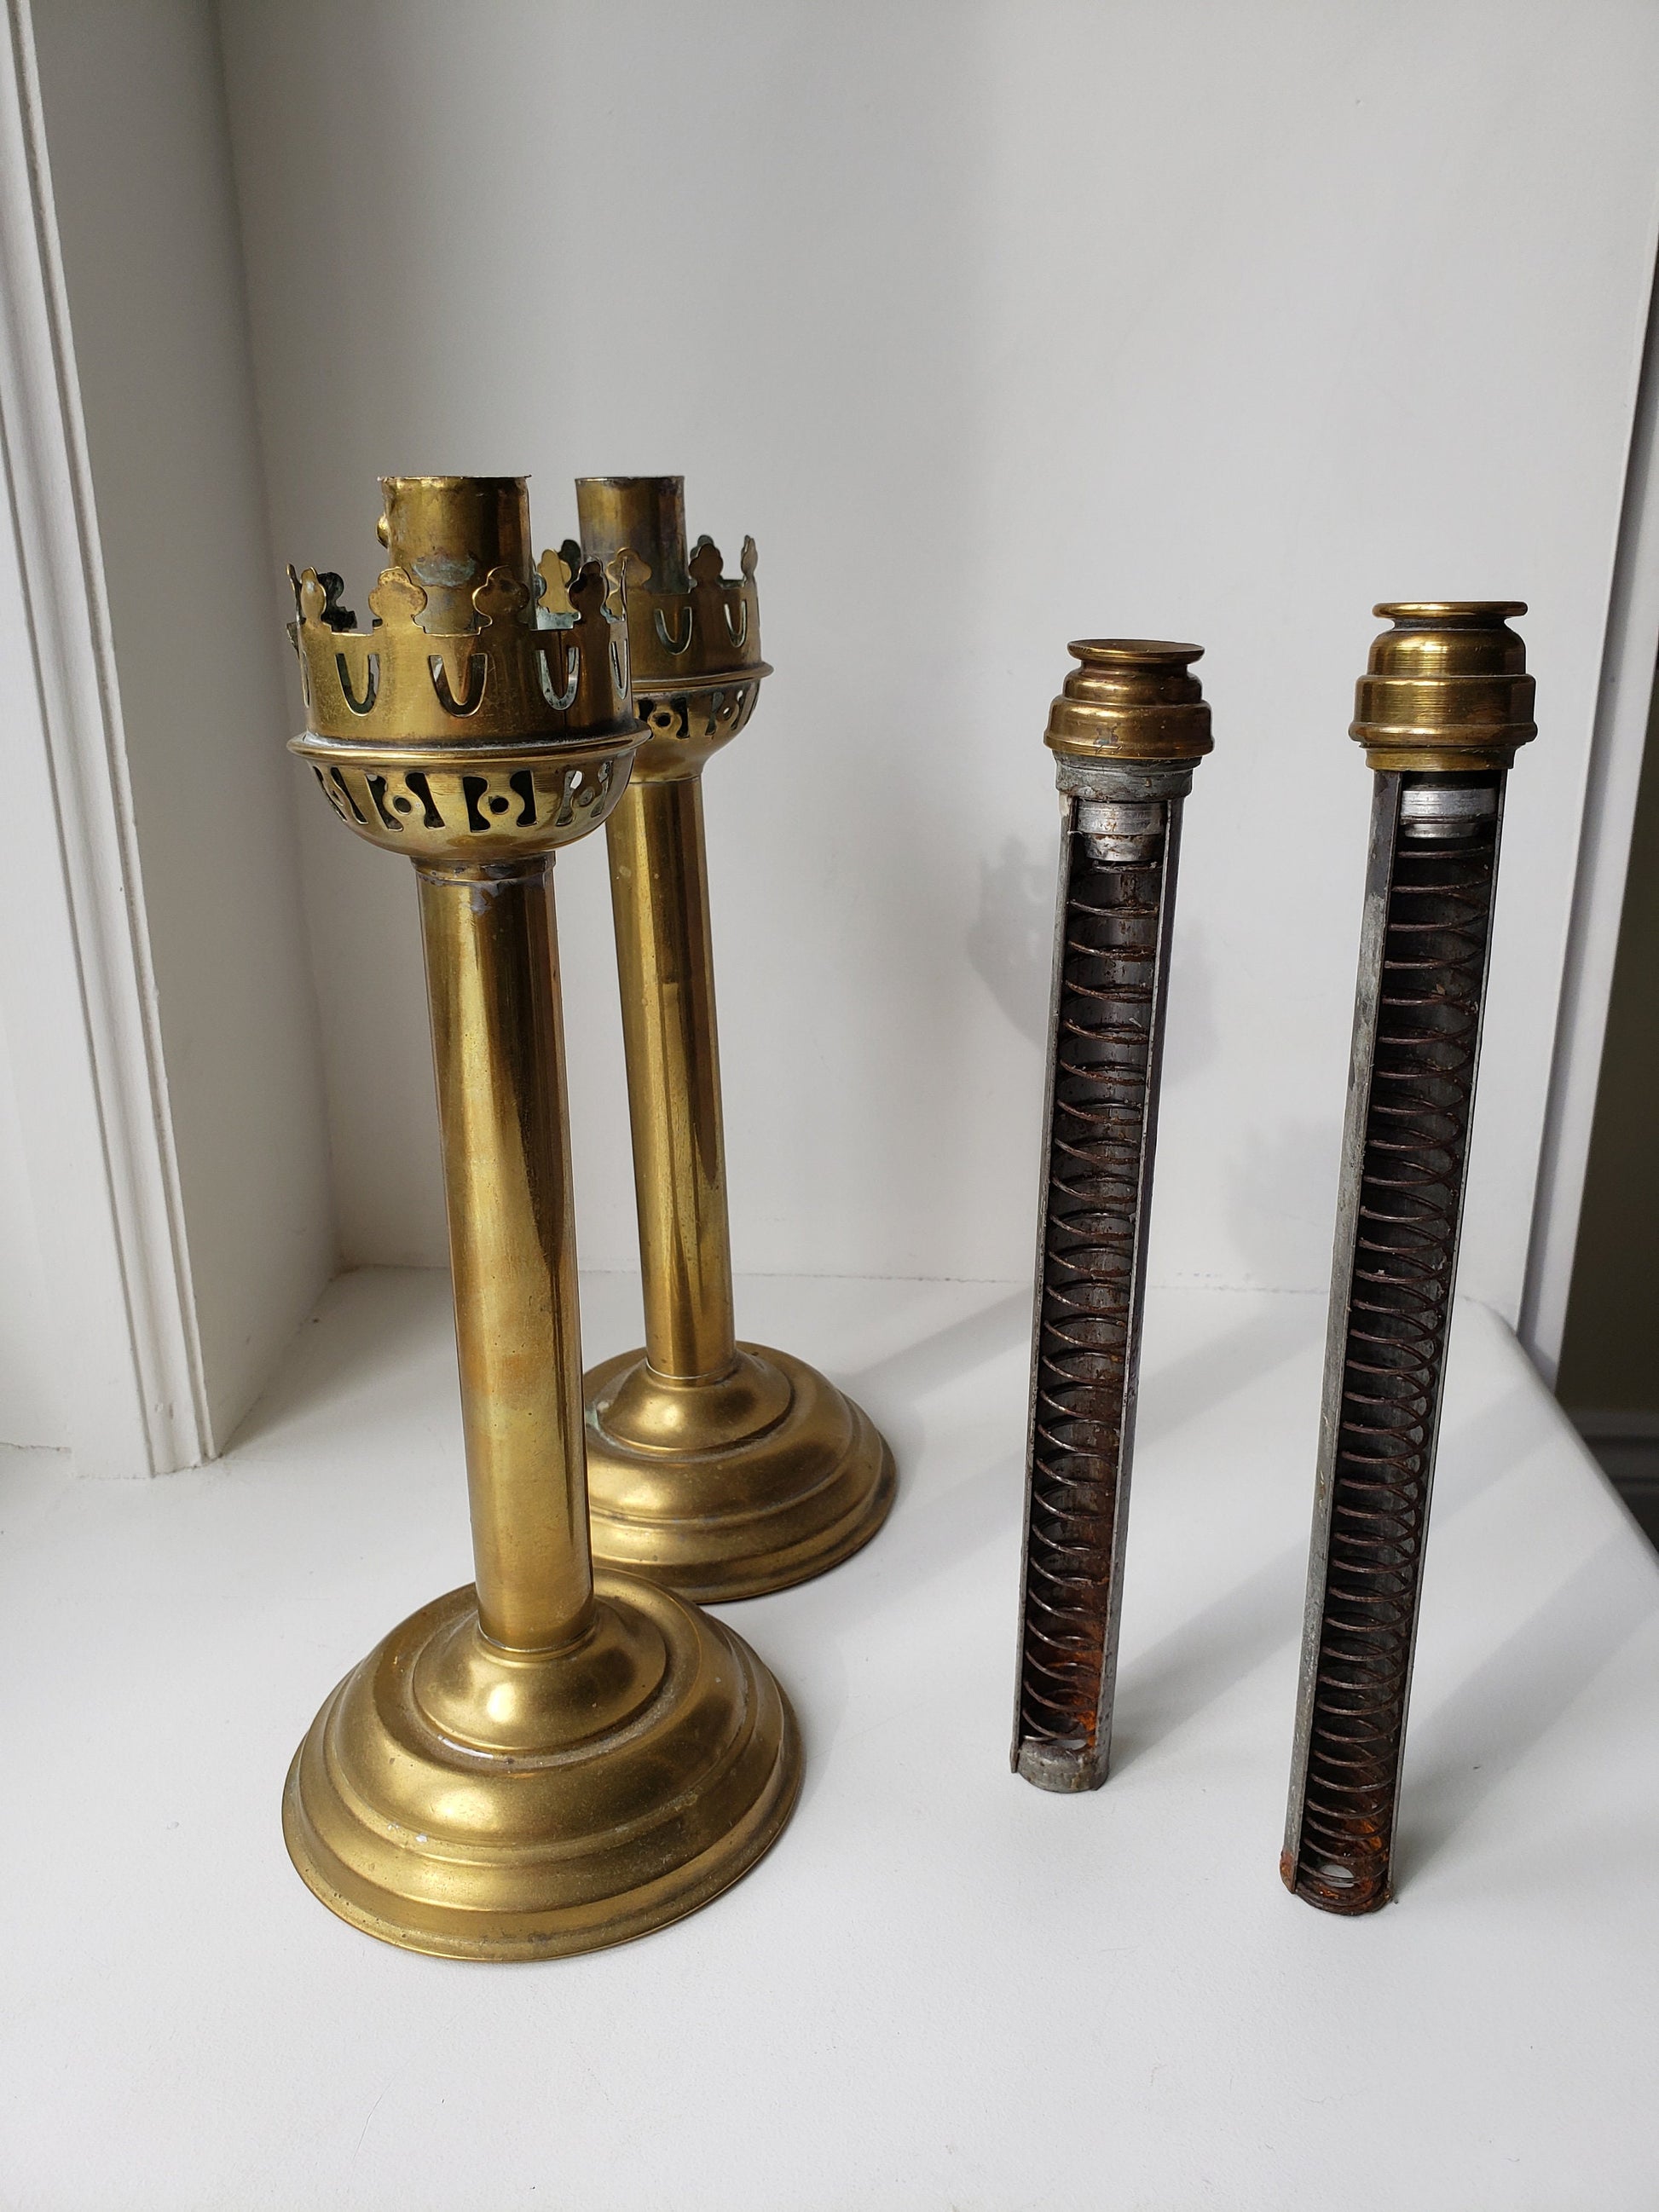 Antique Pair of Nautical Spring Loaded Brass Candlesticks Candle Holders  With Amber Hurricane Glass Chimneys